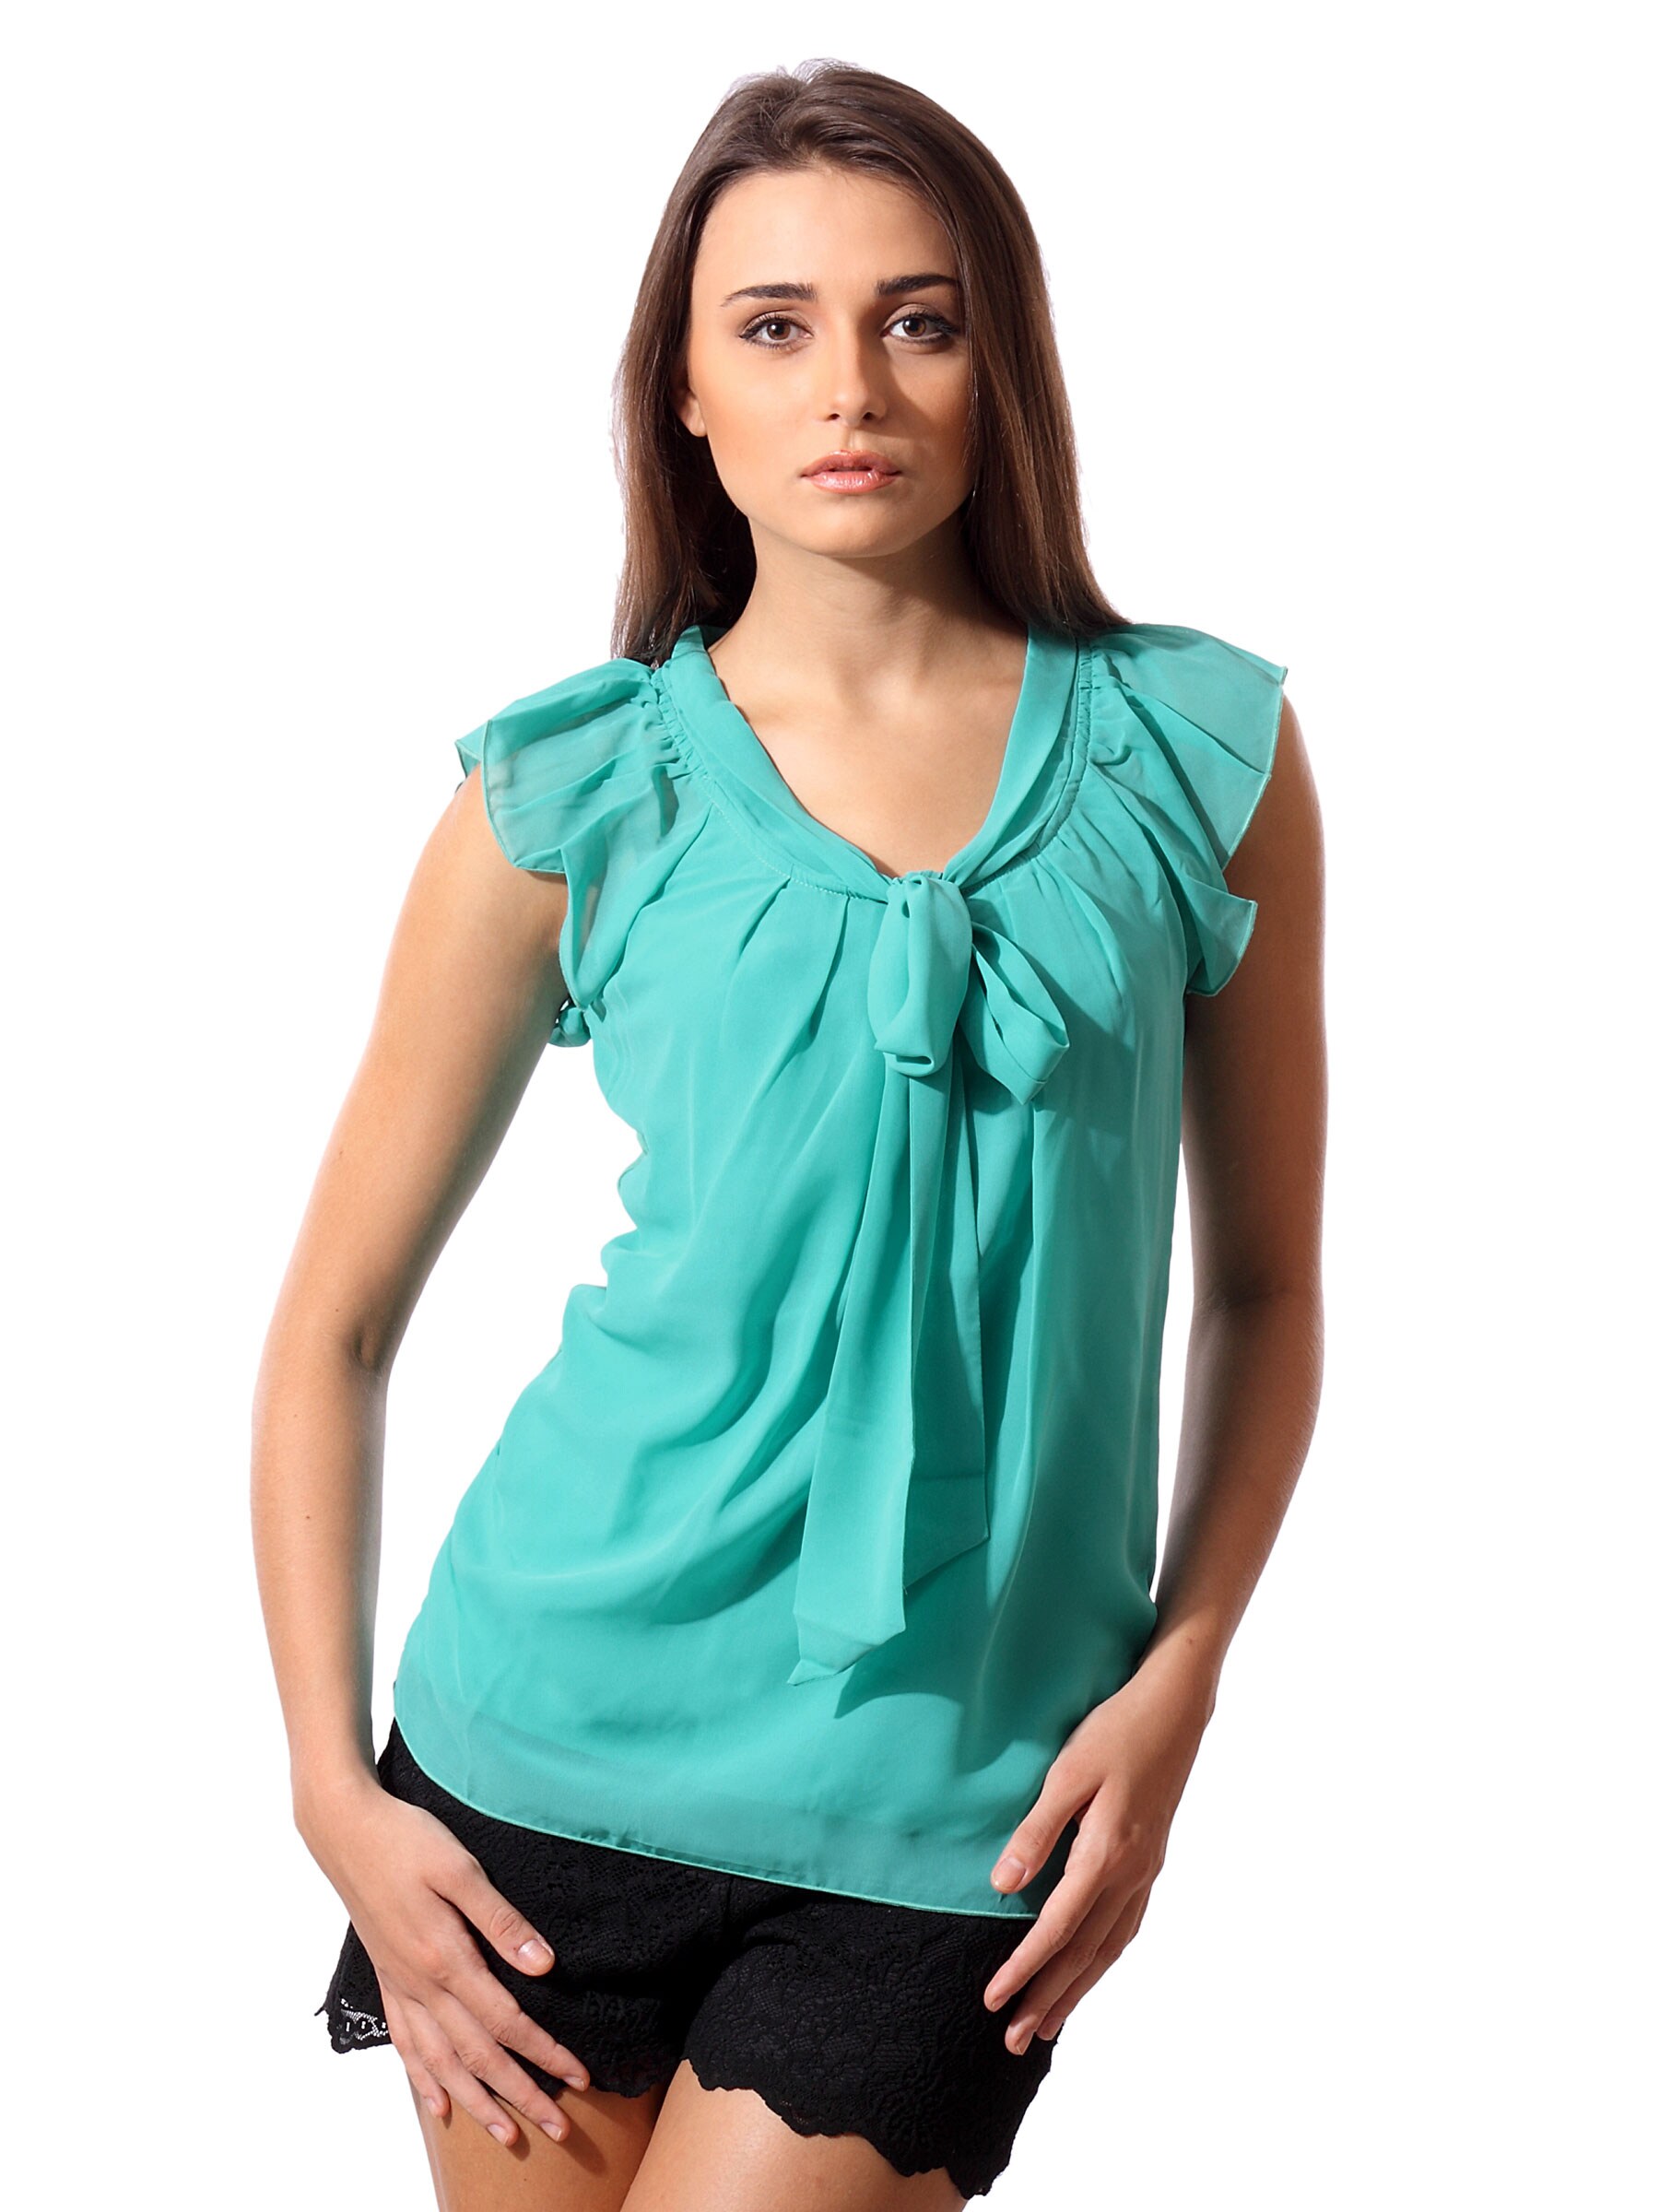 ONLY Women Turquoise Chiffon Top